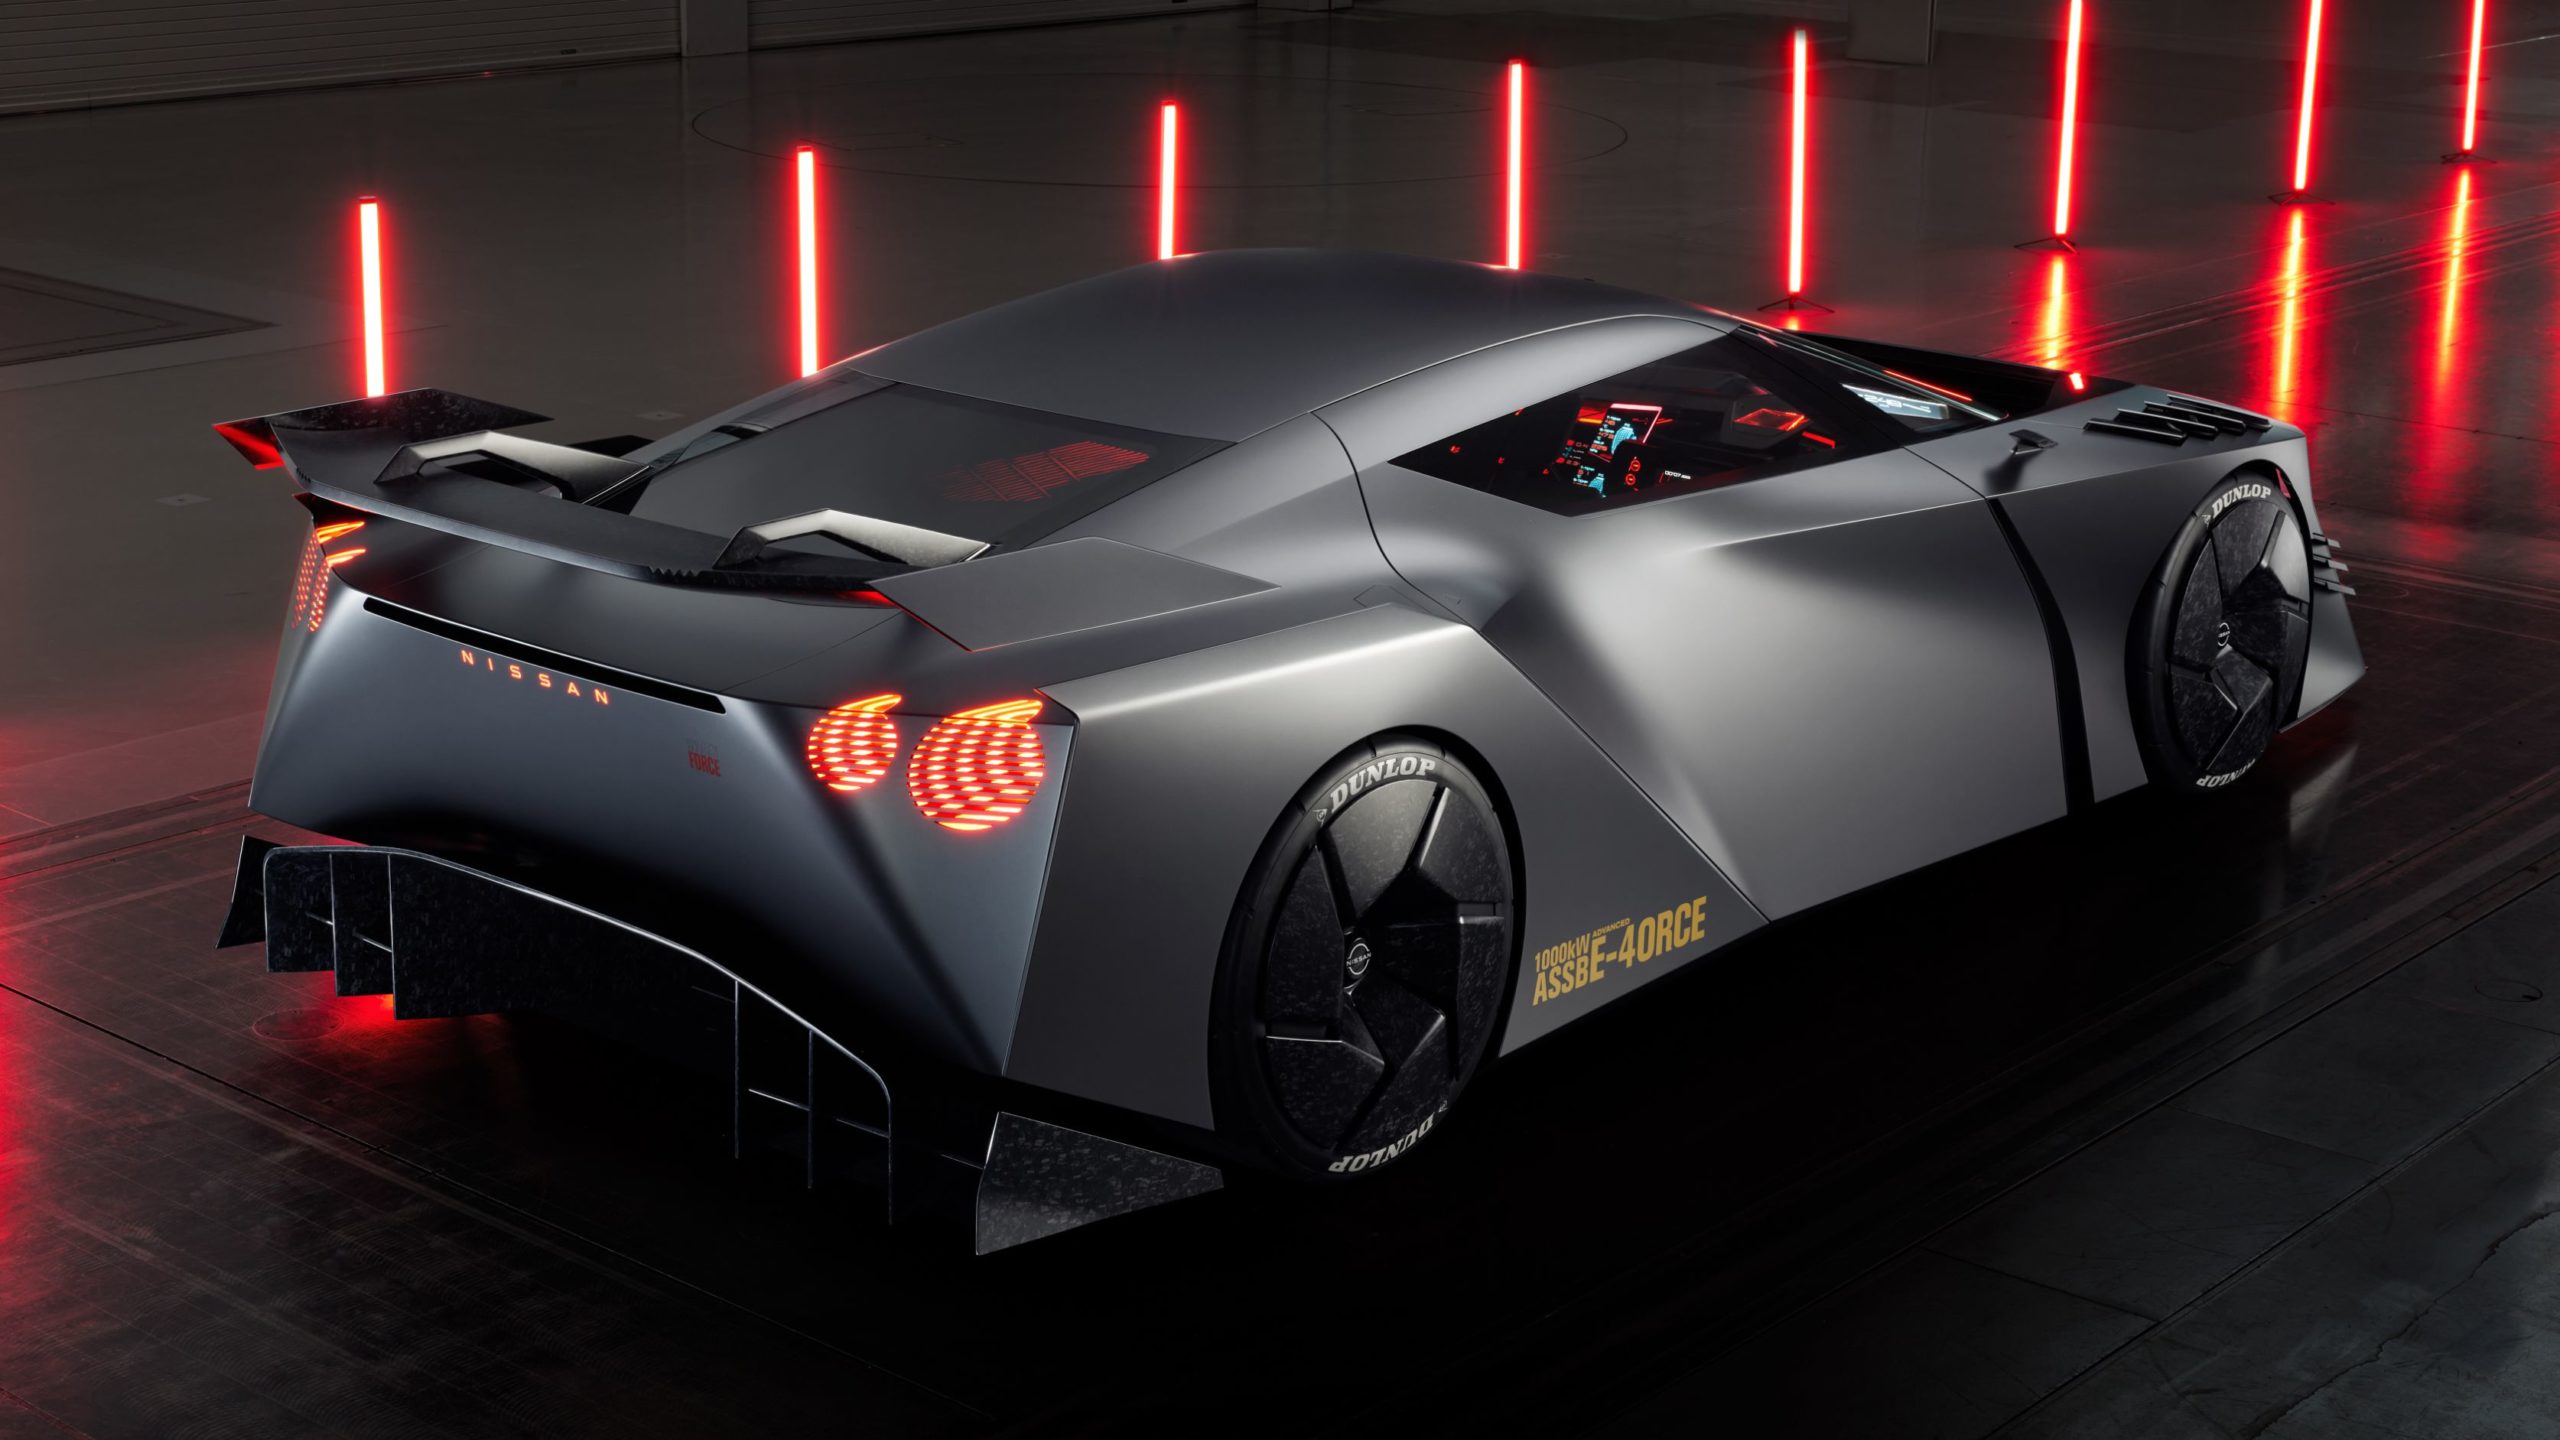 next nissan gt-r will be a hyper electric vehicle with 1,000 kilowatts and extreme performance